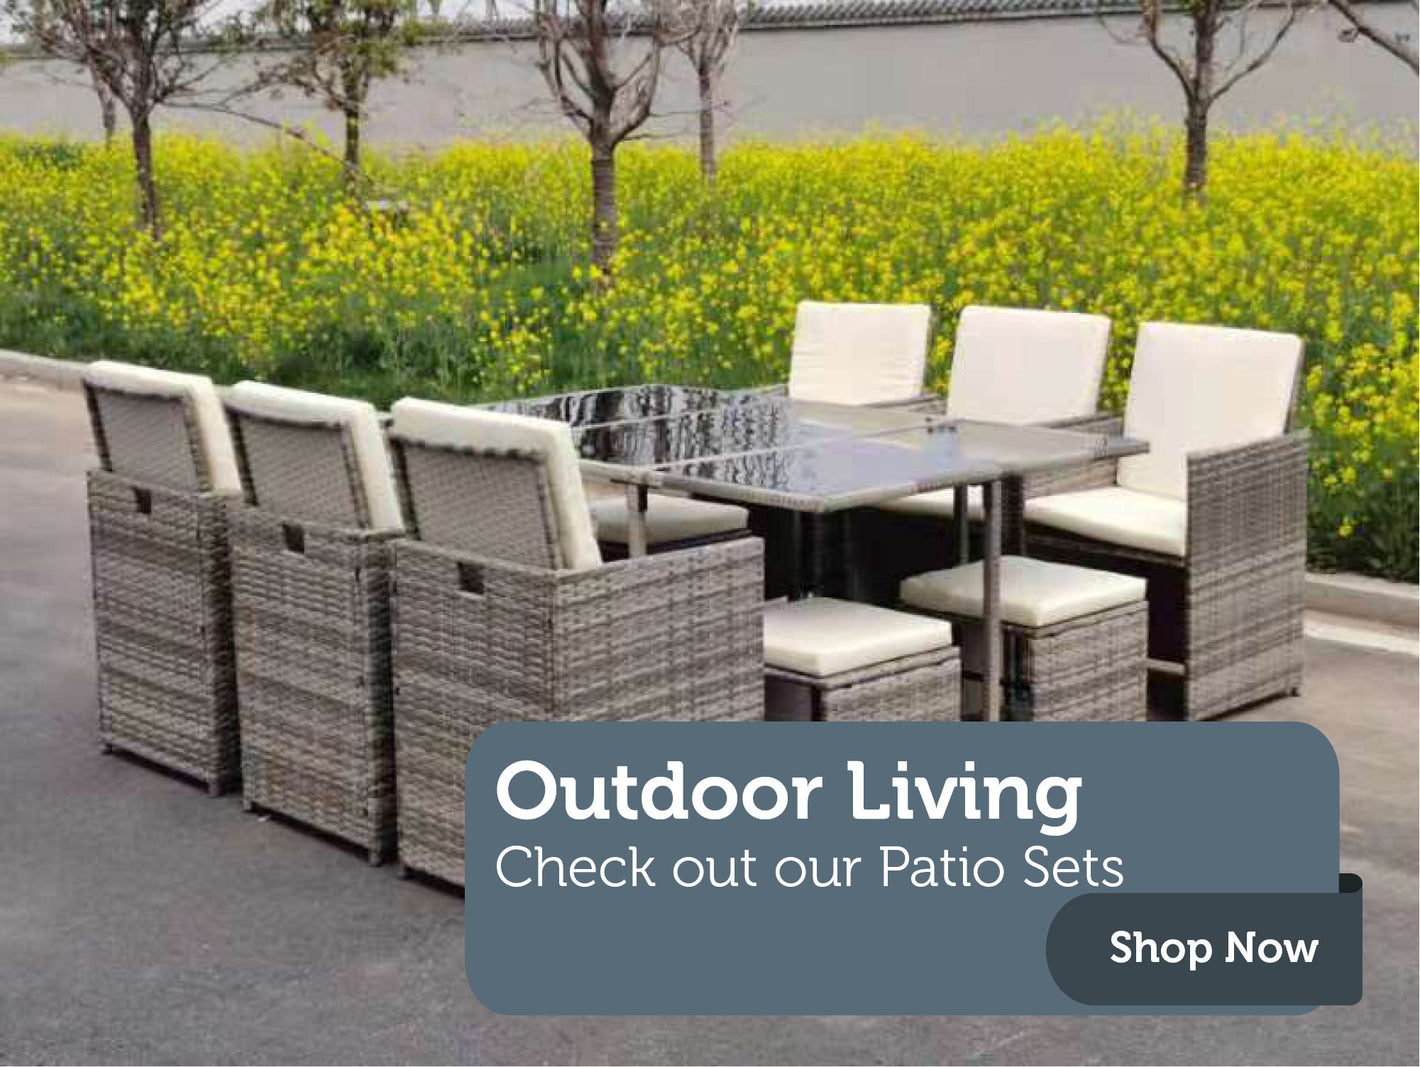 The Outdoor Living Collection at Fitzgeralds Homevalue in Dingle